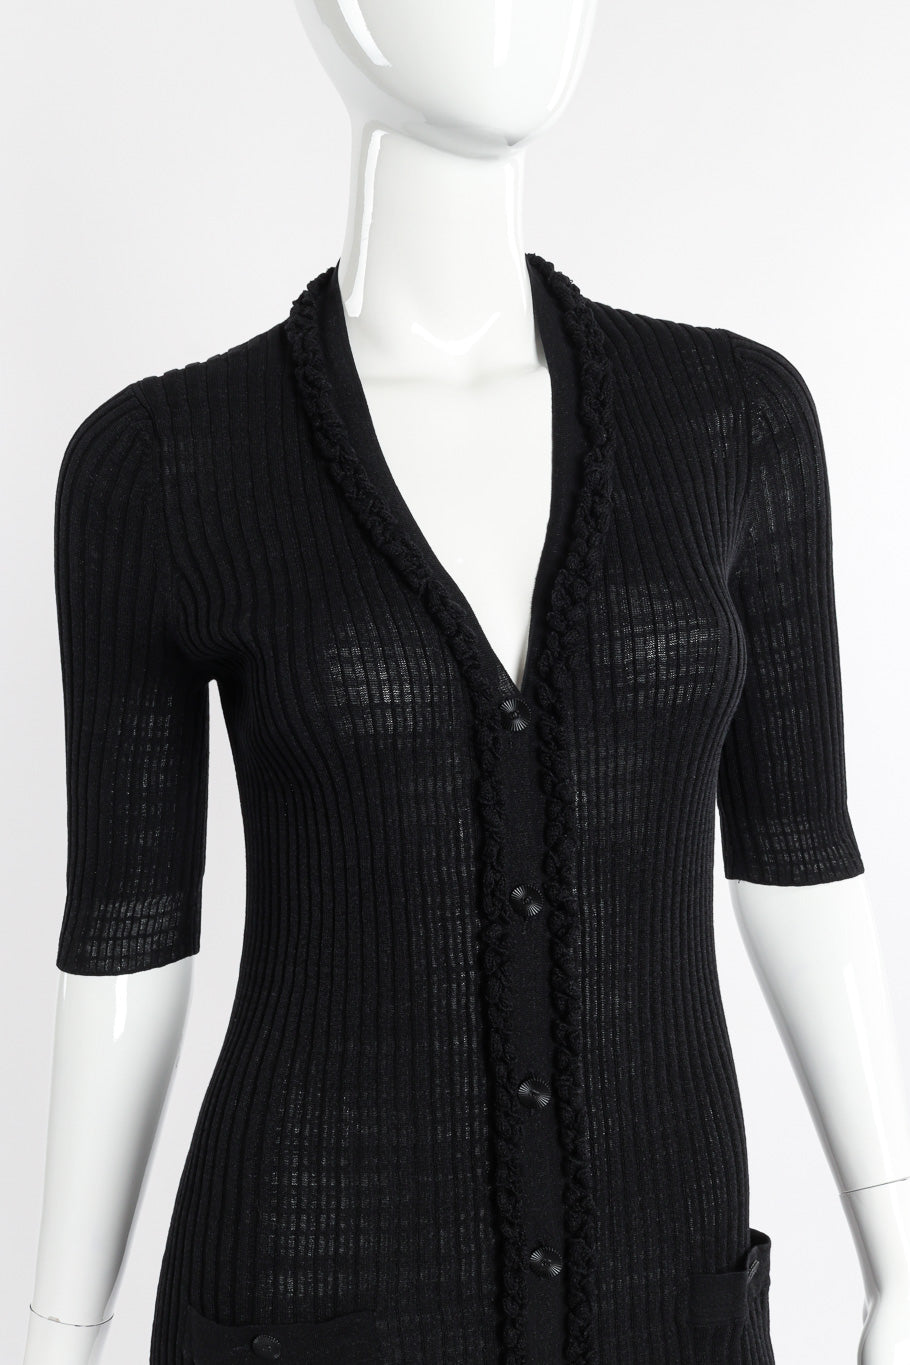 Chanel Ribbed Knit Cardigan front view on mannequin closeup @Recessla